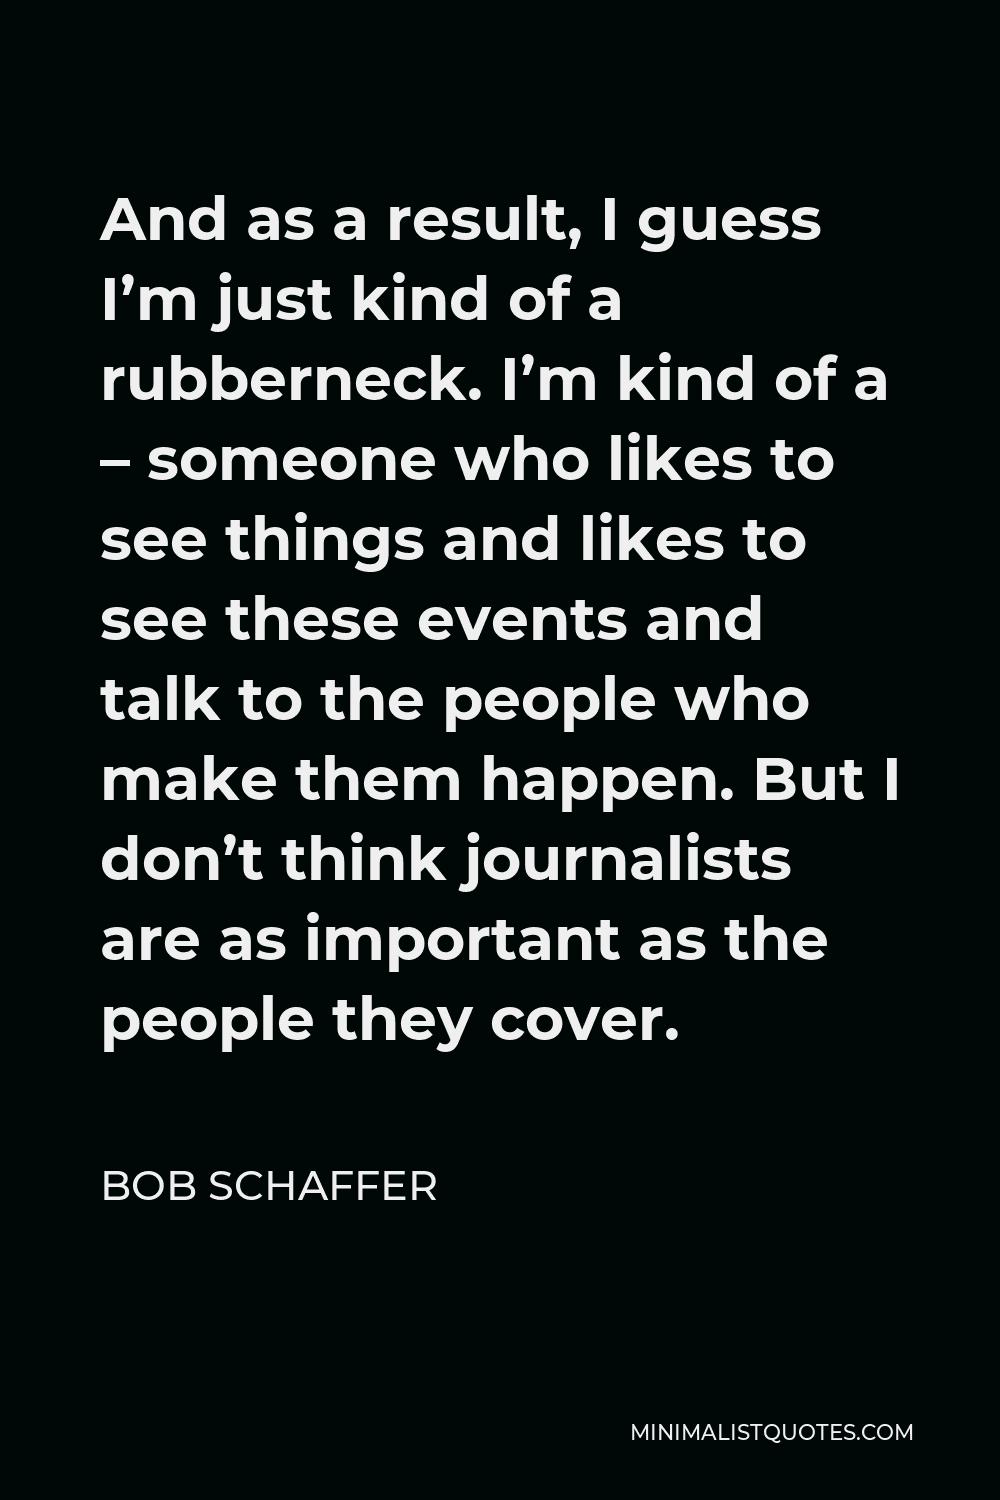 Bob Schaffer Quote - And as a result, I guess I’m just kind of a rubberneck. I’m kind of a – someone who likes to see things and likes to see these events and talk to the people who make them happen. But I don’t think journalists are as important as the people they cover.